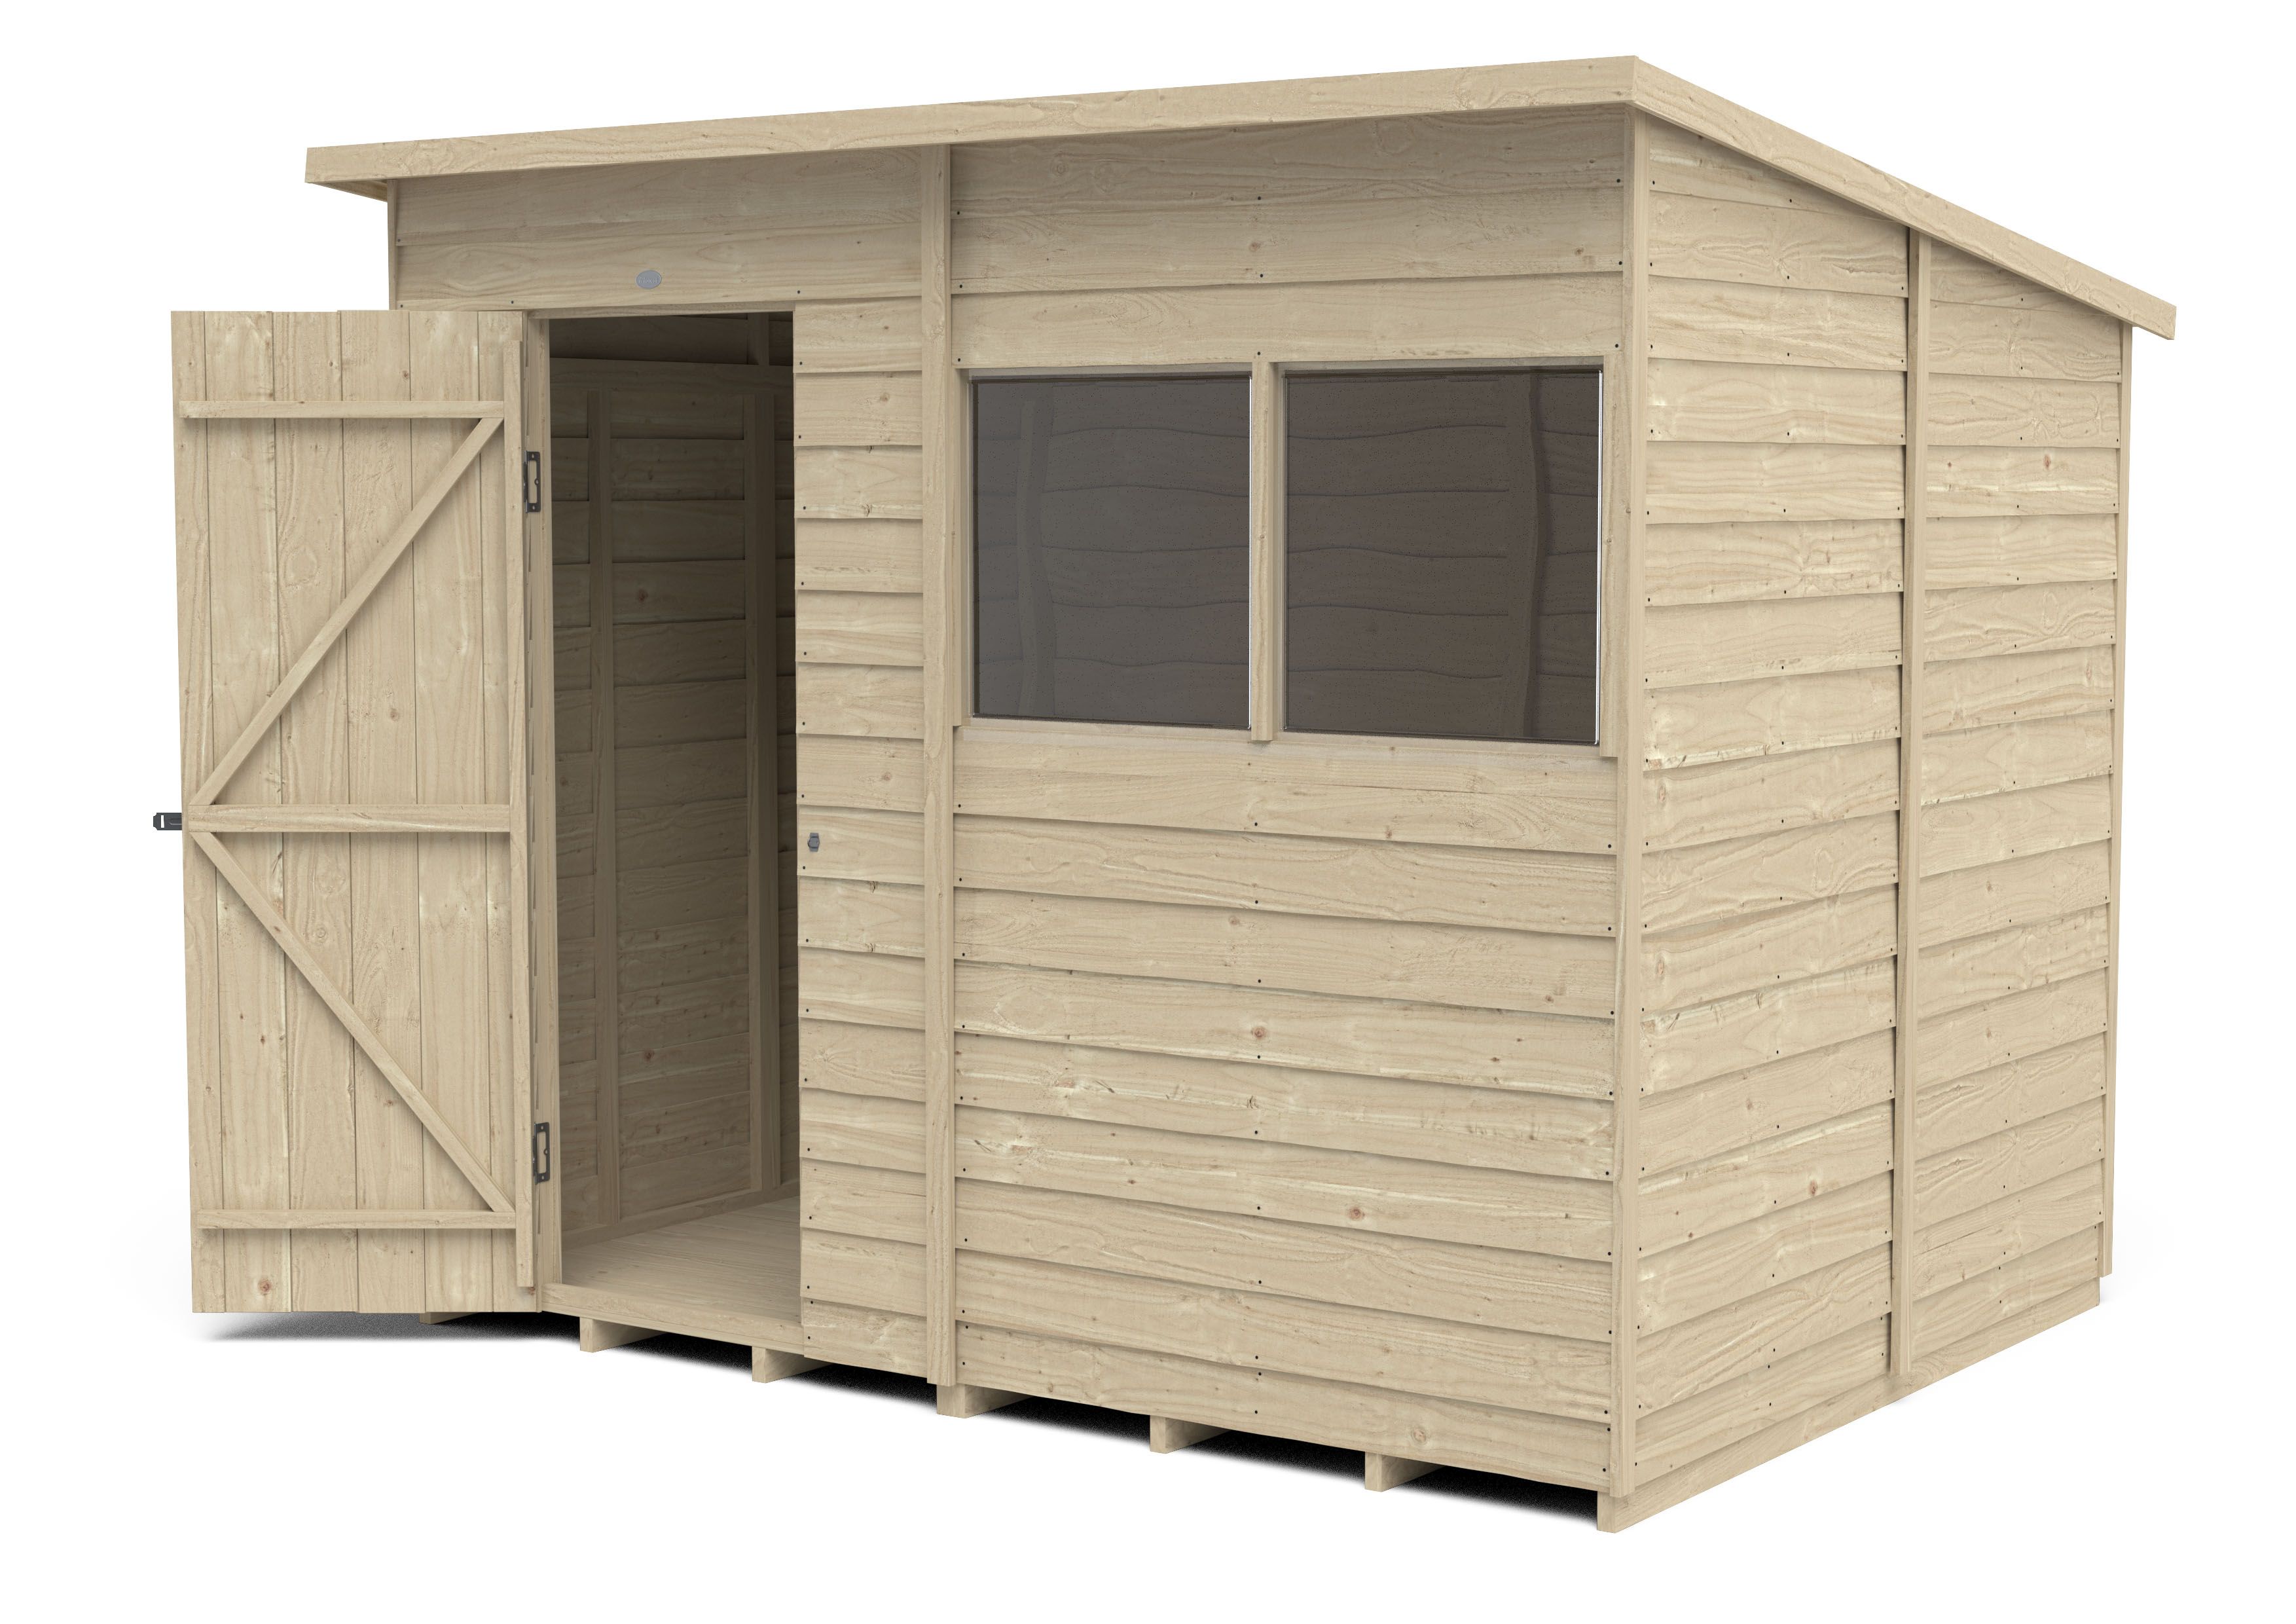 Forest Garden Overlap 8x6 ft Pent Wooden Pressure treated Shed with floor & 2 windows - Assembly service included